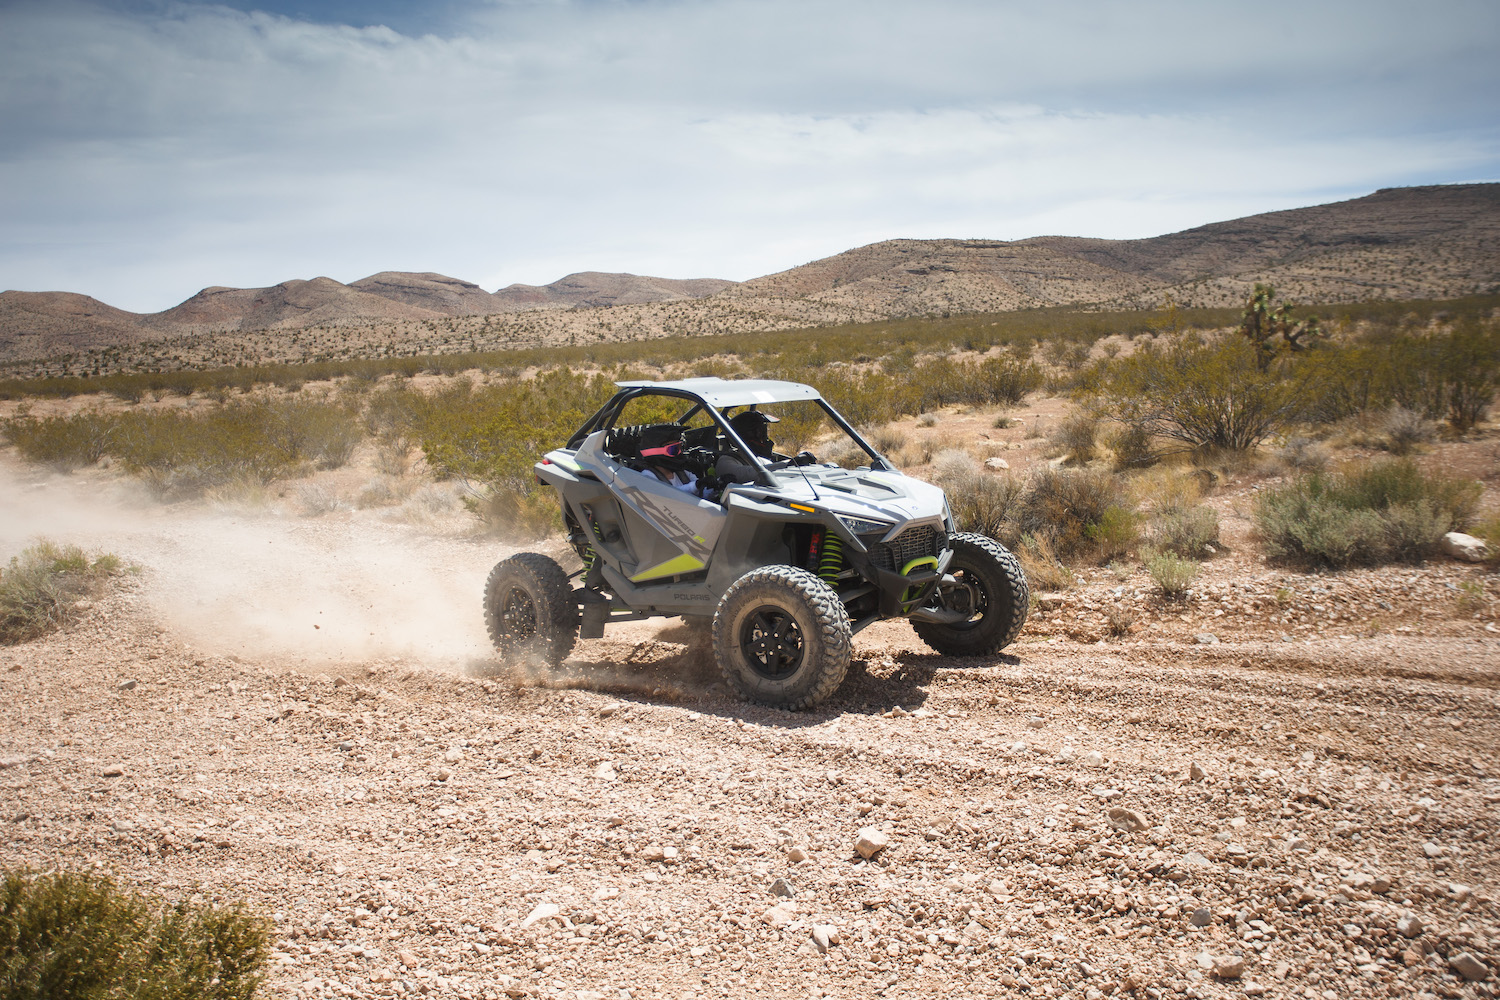 Close up of front end angle of Polaris RZR Turbo R throwing up dirt on a dirt trail in the desert.